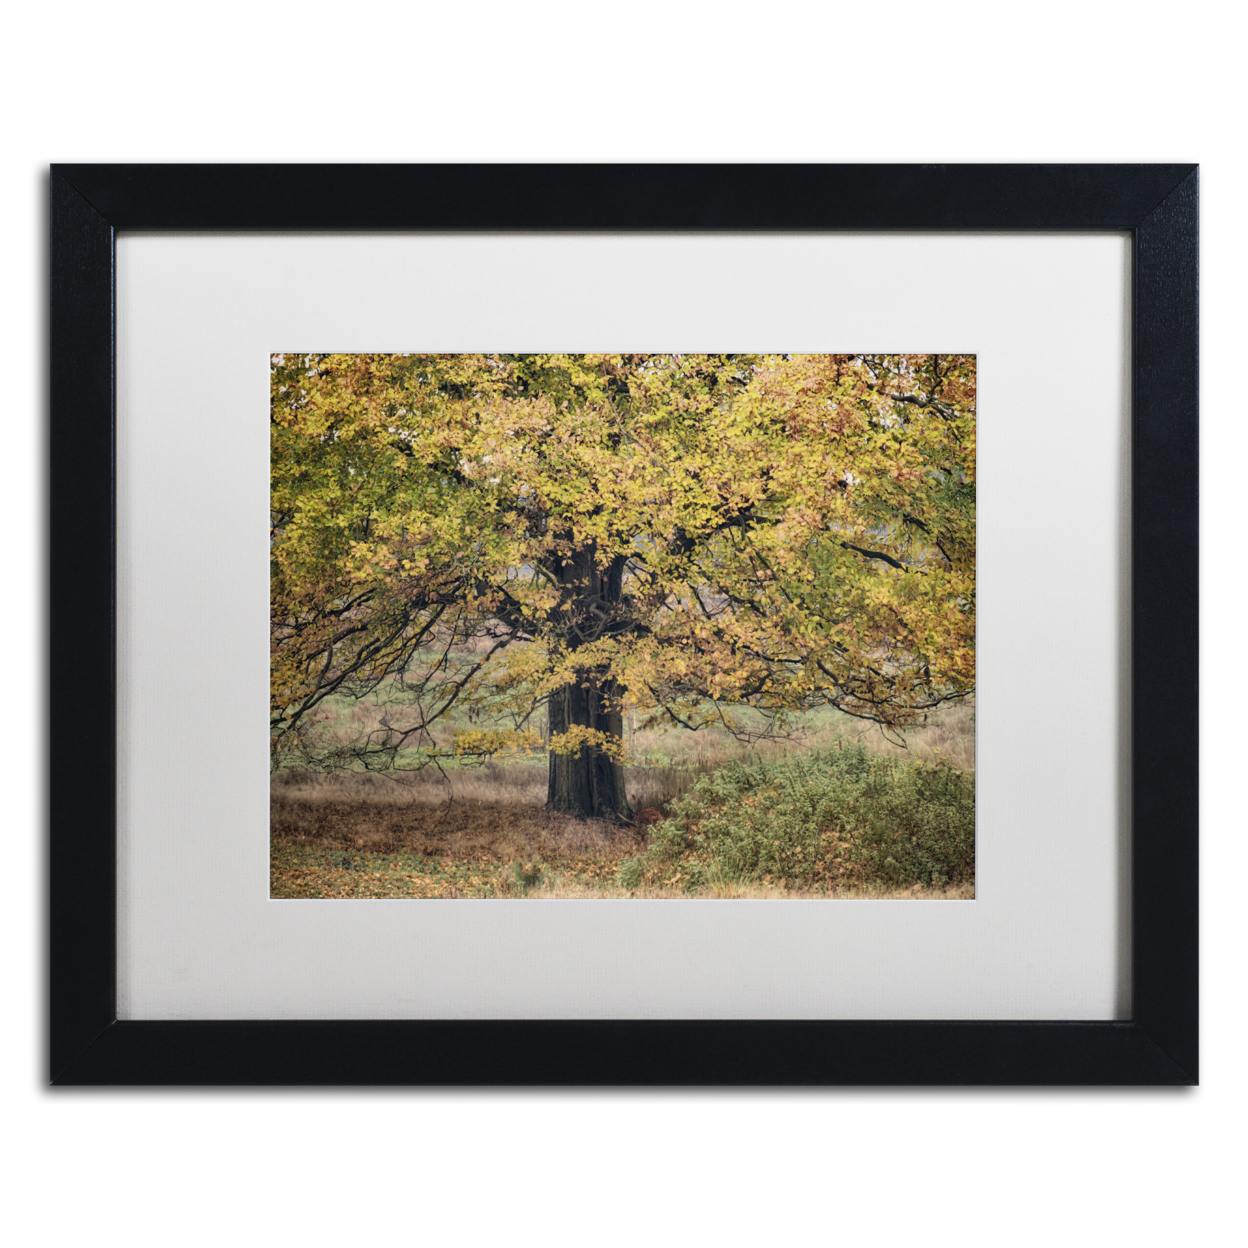 Cora Niele 'Beech Tree' Black Wooden Framed Art 18 X 22 Inches